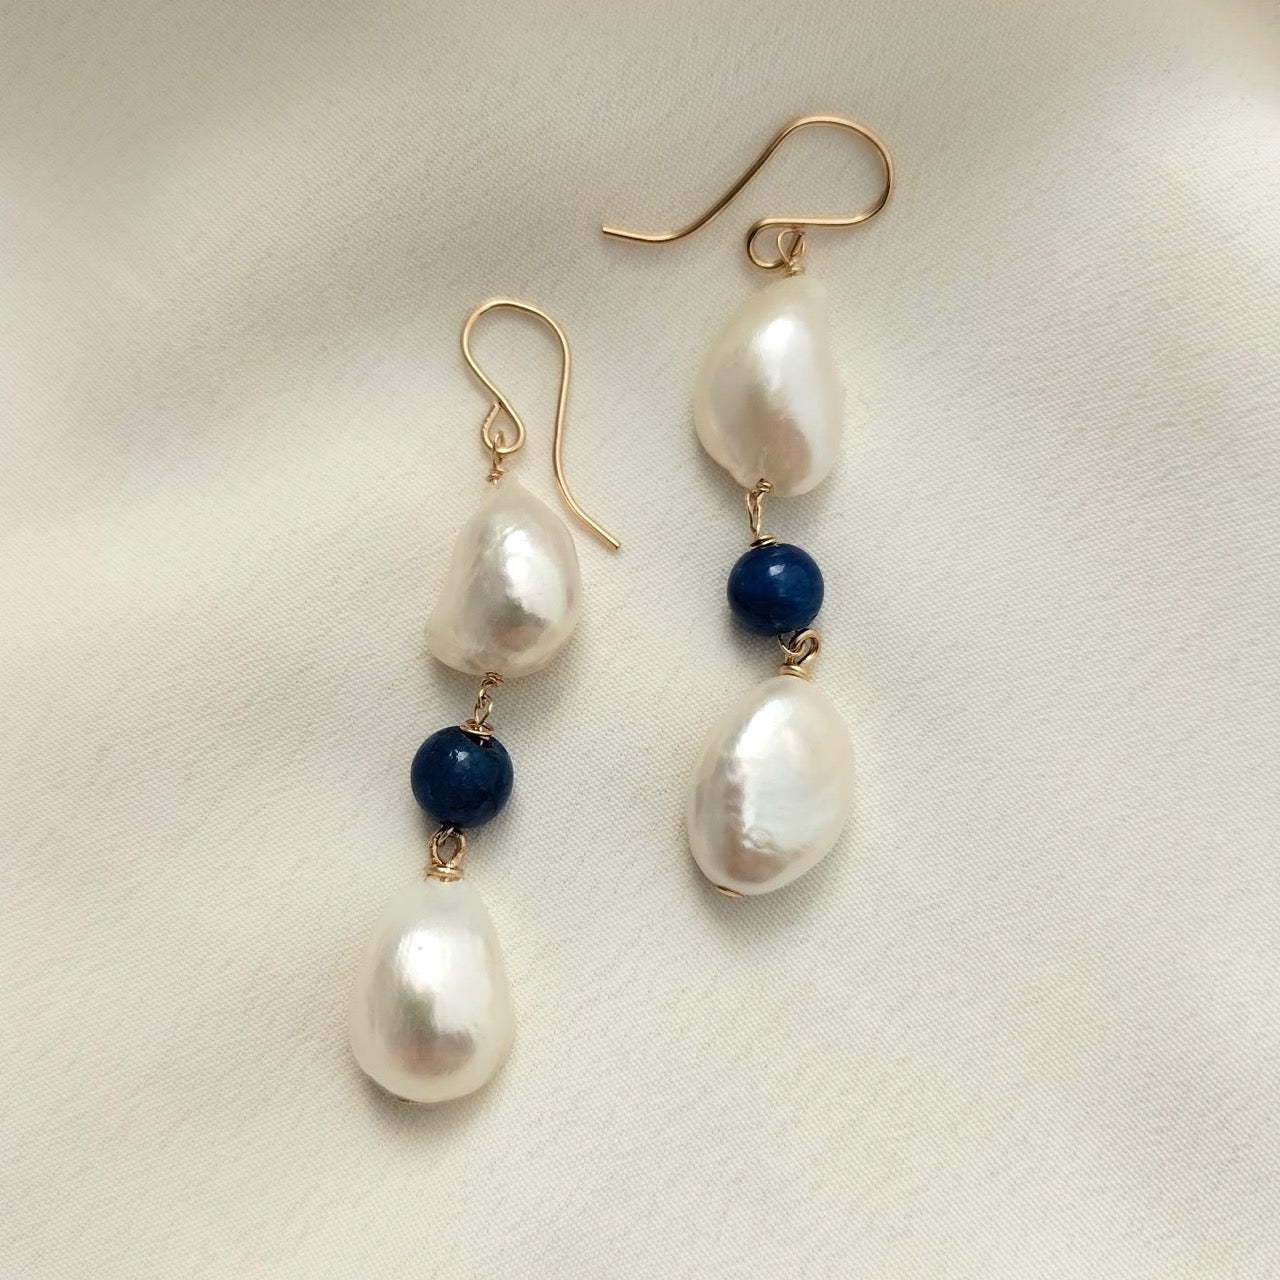 Long Pearl earrings with blue beads